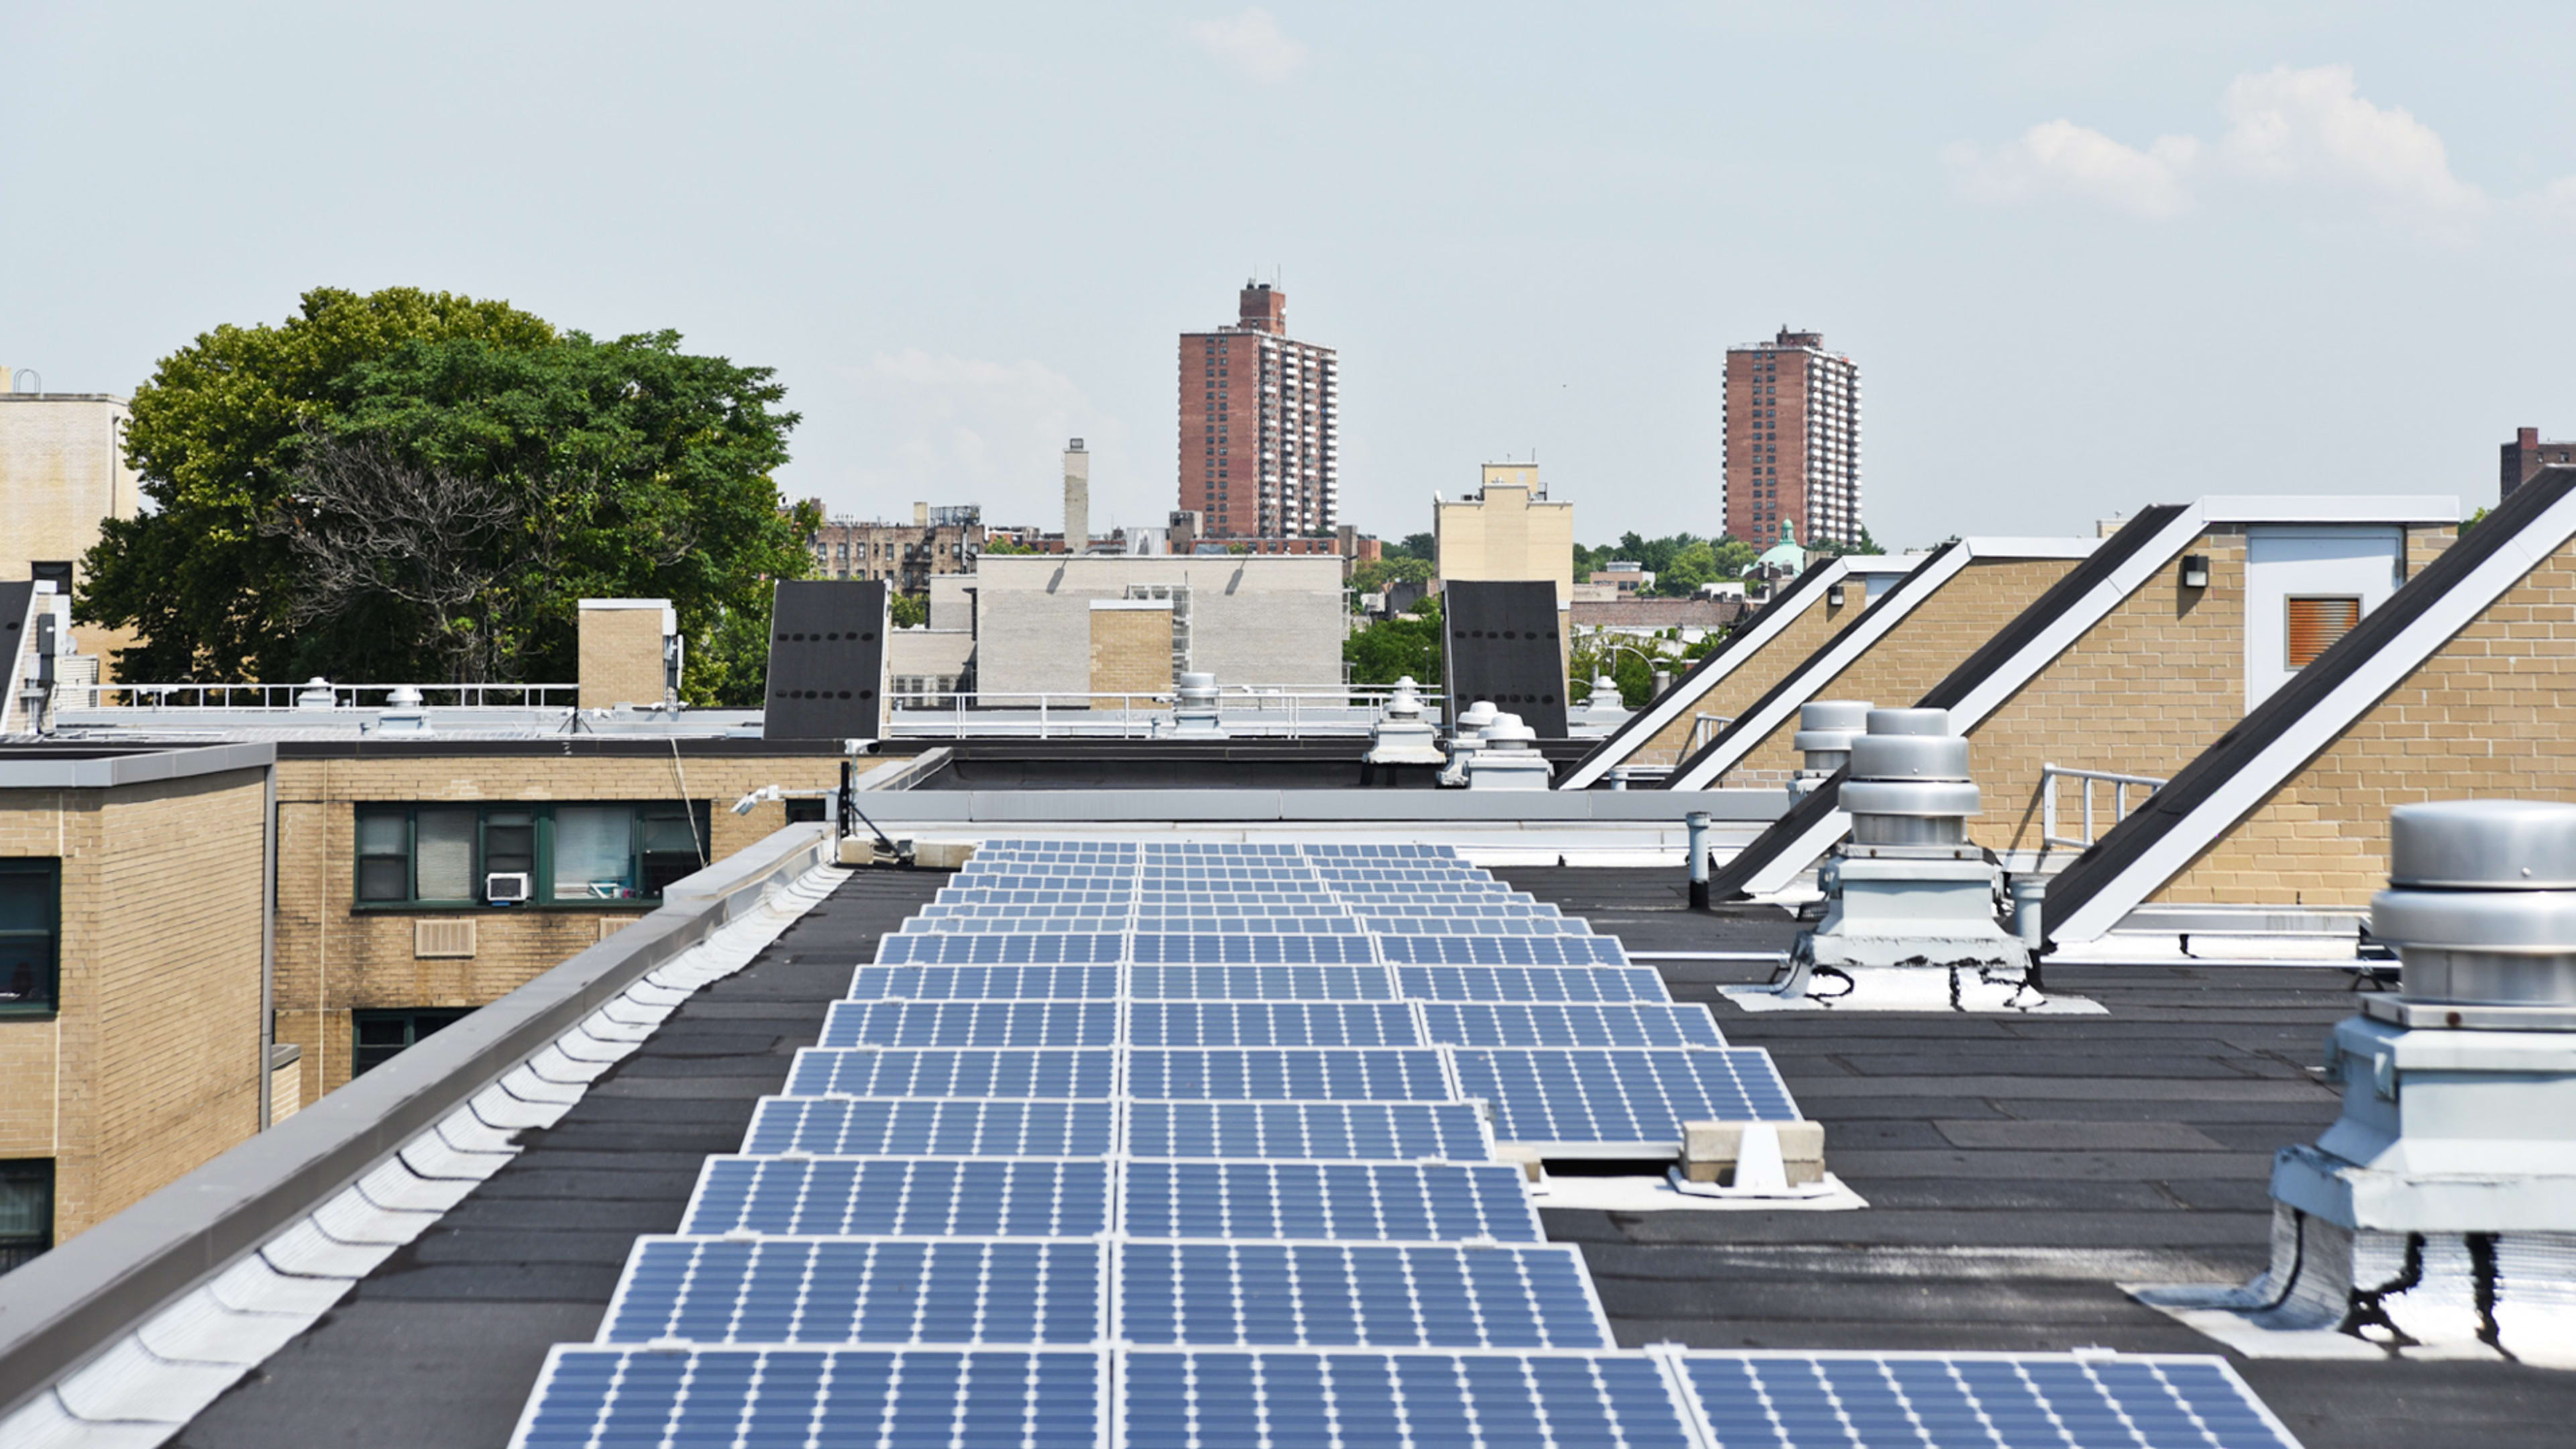 These apartments’ microgrid is a lesson in urban resilience